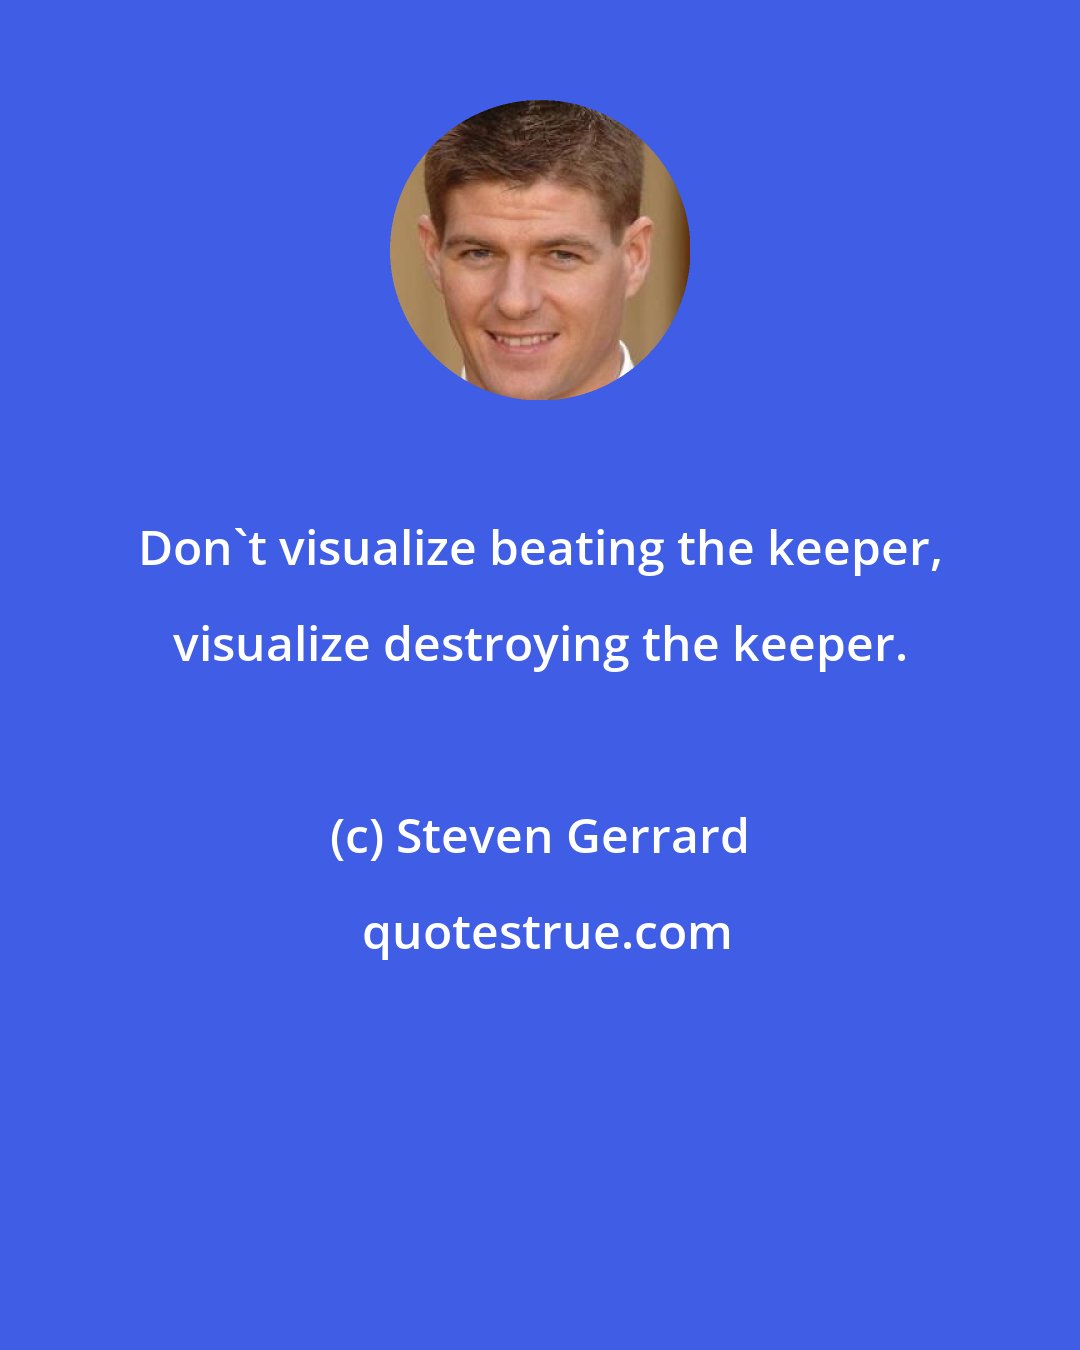 Steven Gerrard: Don't visualize beating the keeper, visualize destroying the keeper.